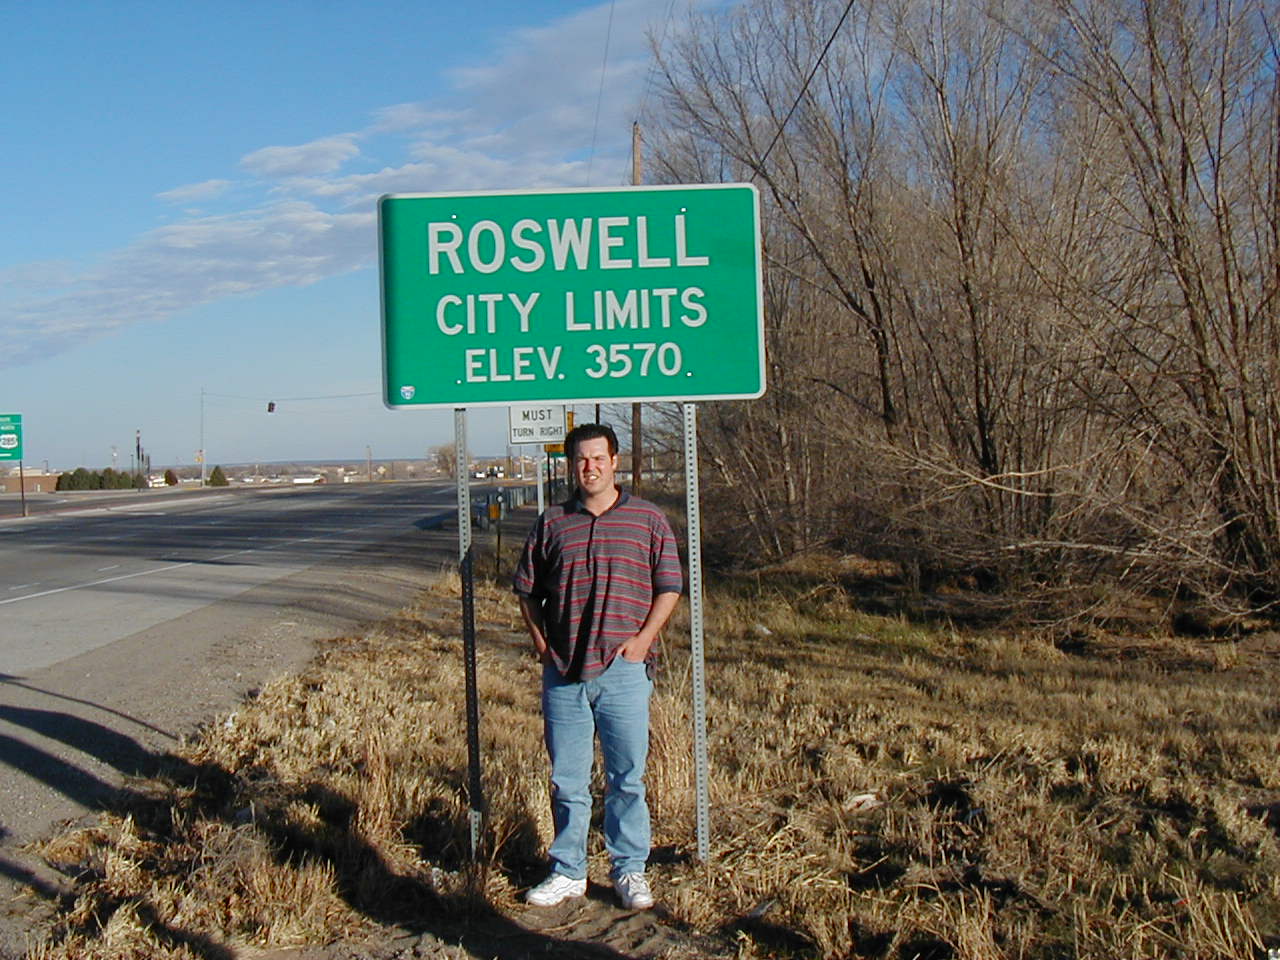 Me in Roswell.